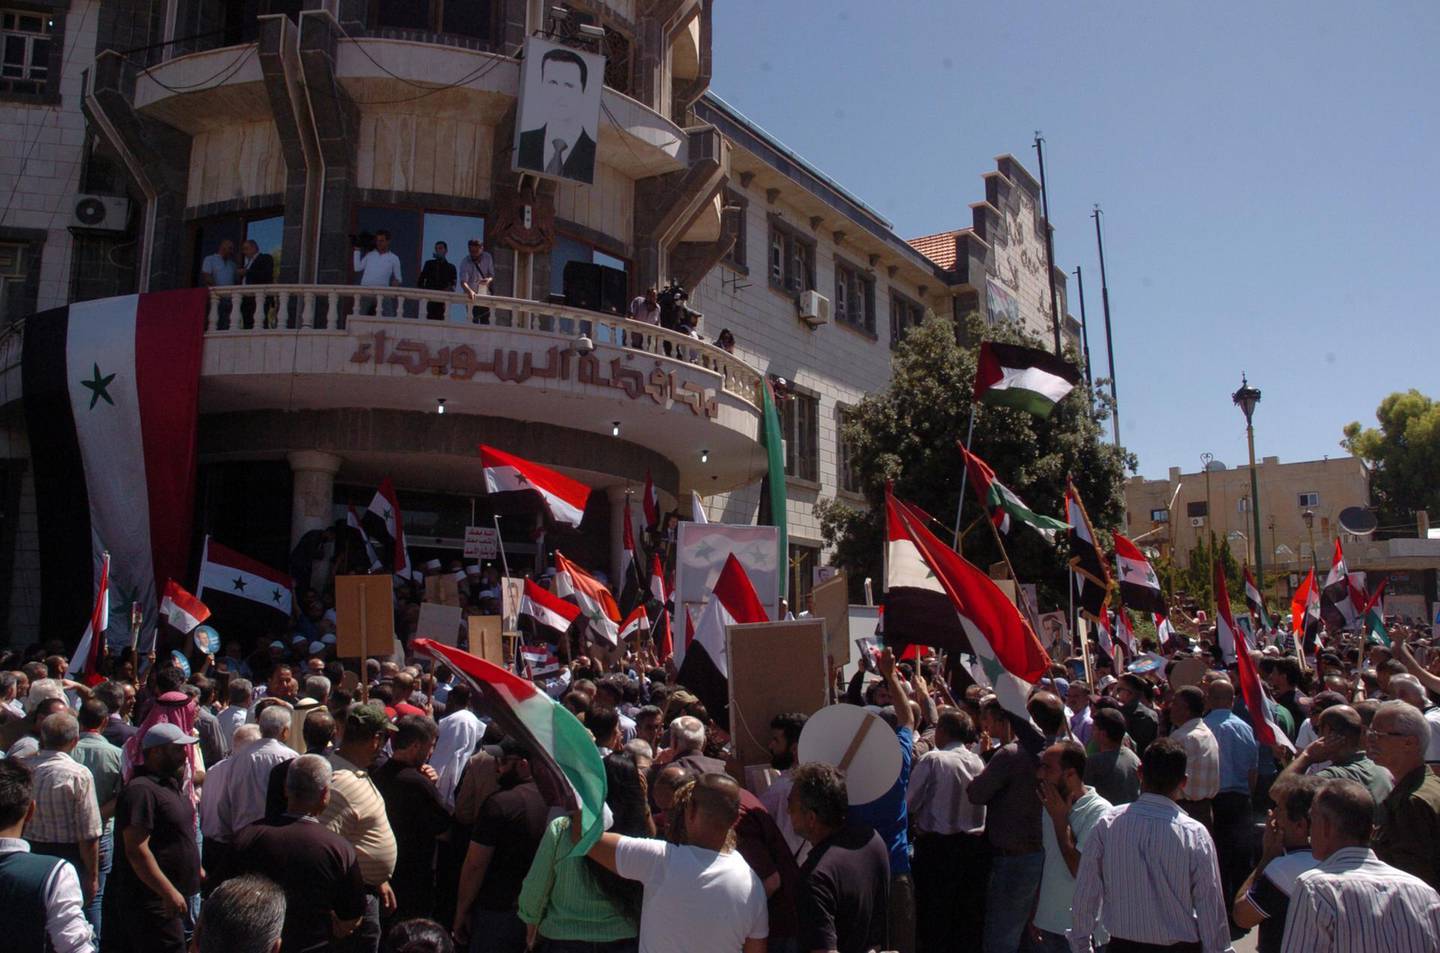 Supporters of Syria's President Bashar al-Assad carry his pictures and flags during a demonstration, in front of the provincial government offices, in the mainly Druze city of Sweida, Syria in this handout released by SANA on June 10, 2020. SANA/Handout via REUTERS ATTENTION EDITORS - THIS IMAGE WAS PROVIDED BY A THIRD PARTY. REUTERS IS UNABLE TO INDEPENDENTLY VERIFY THIS IMAGE